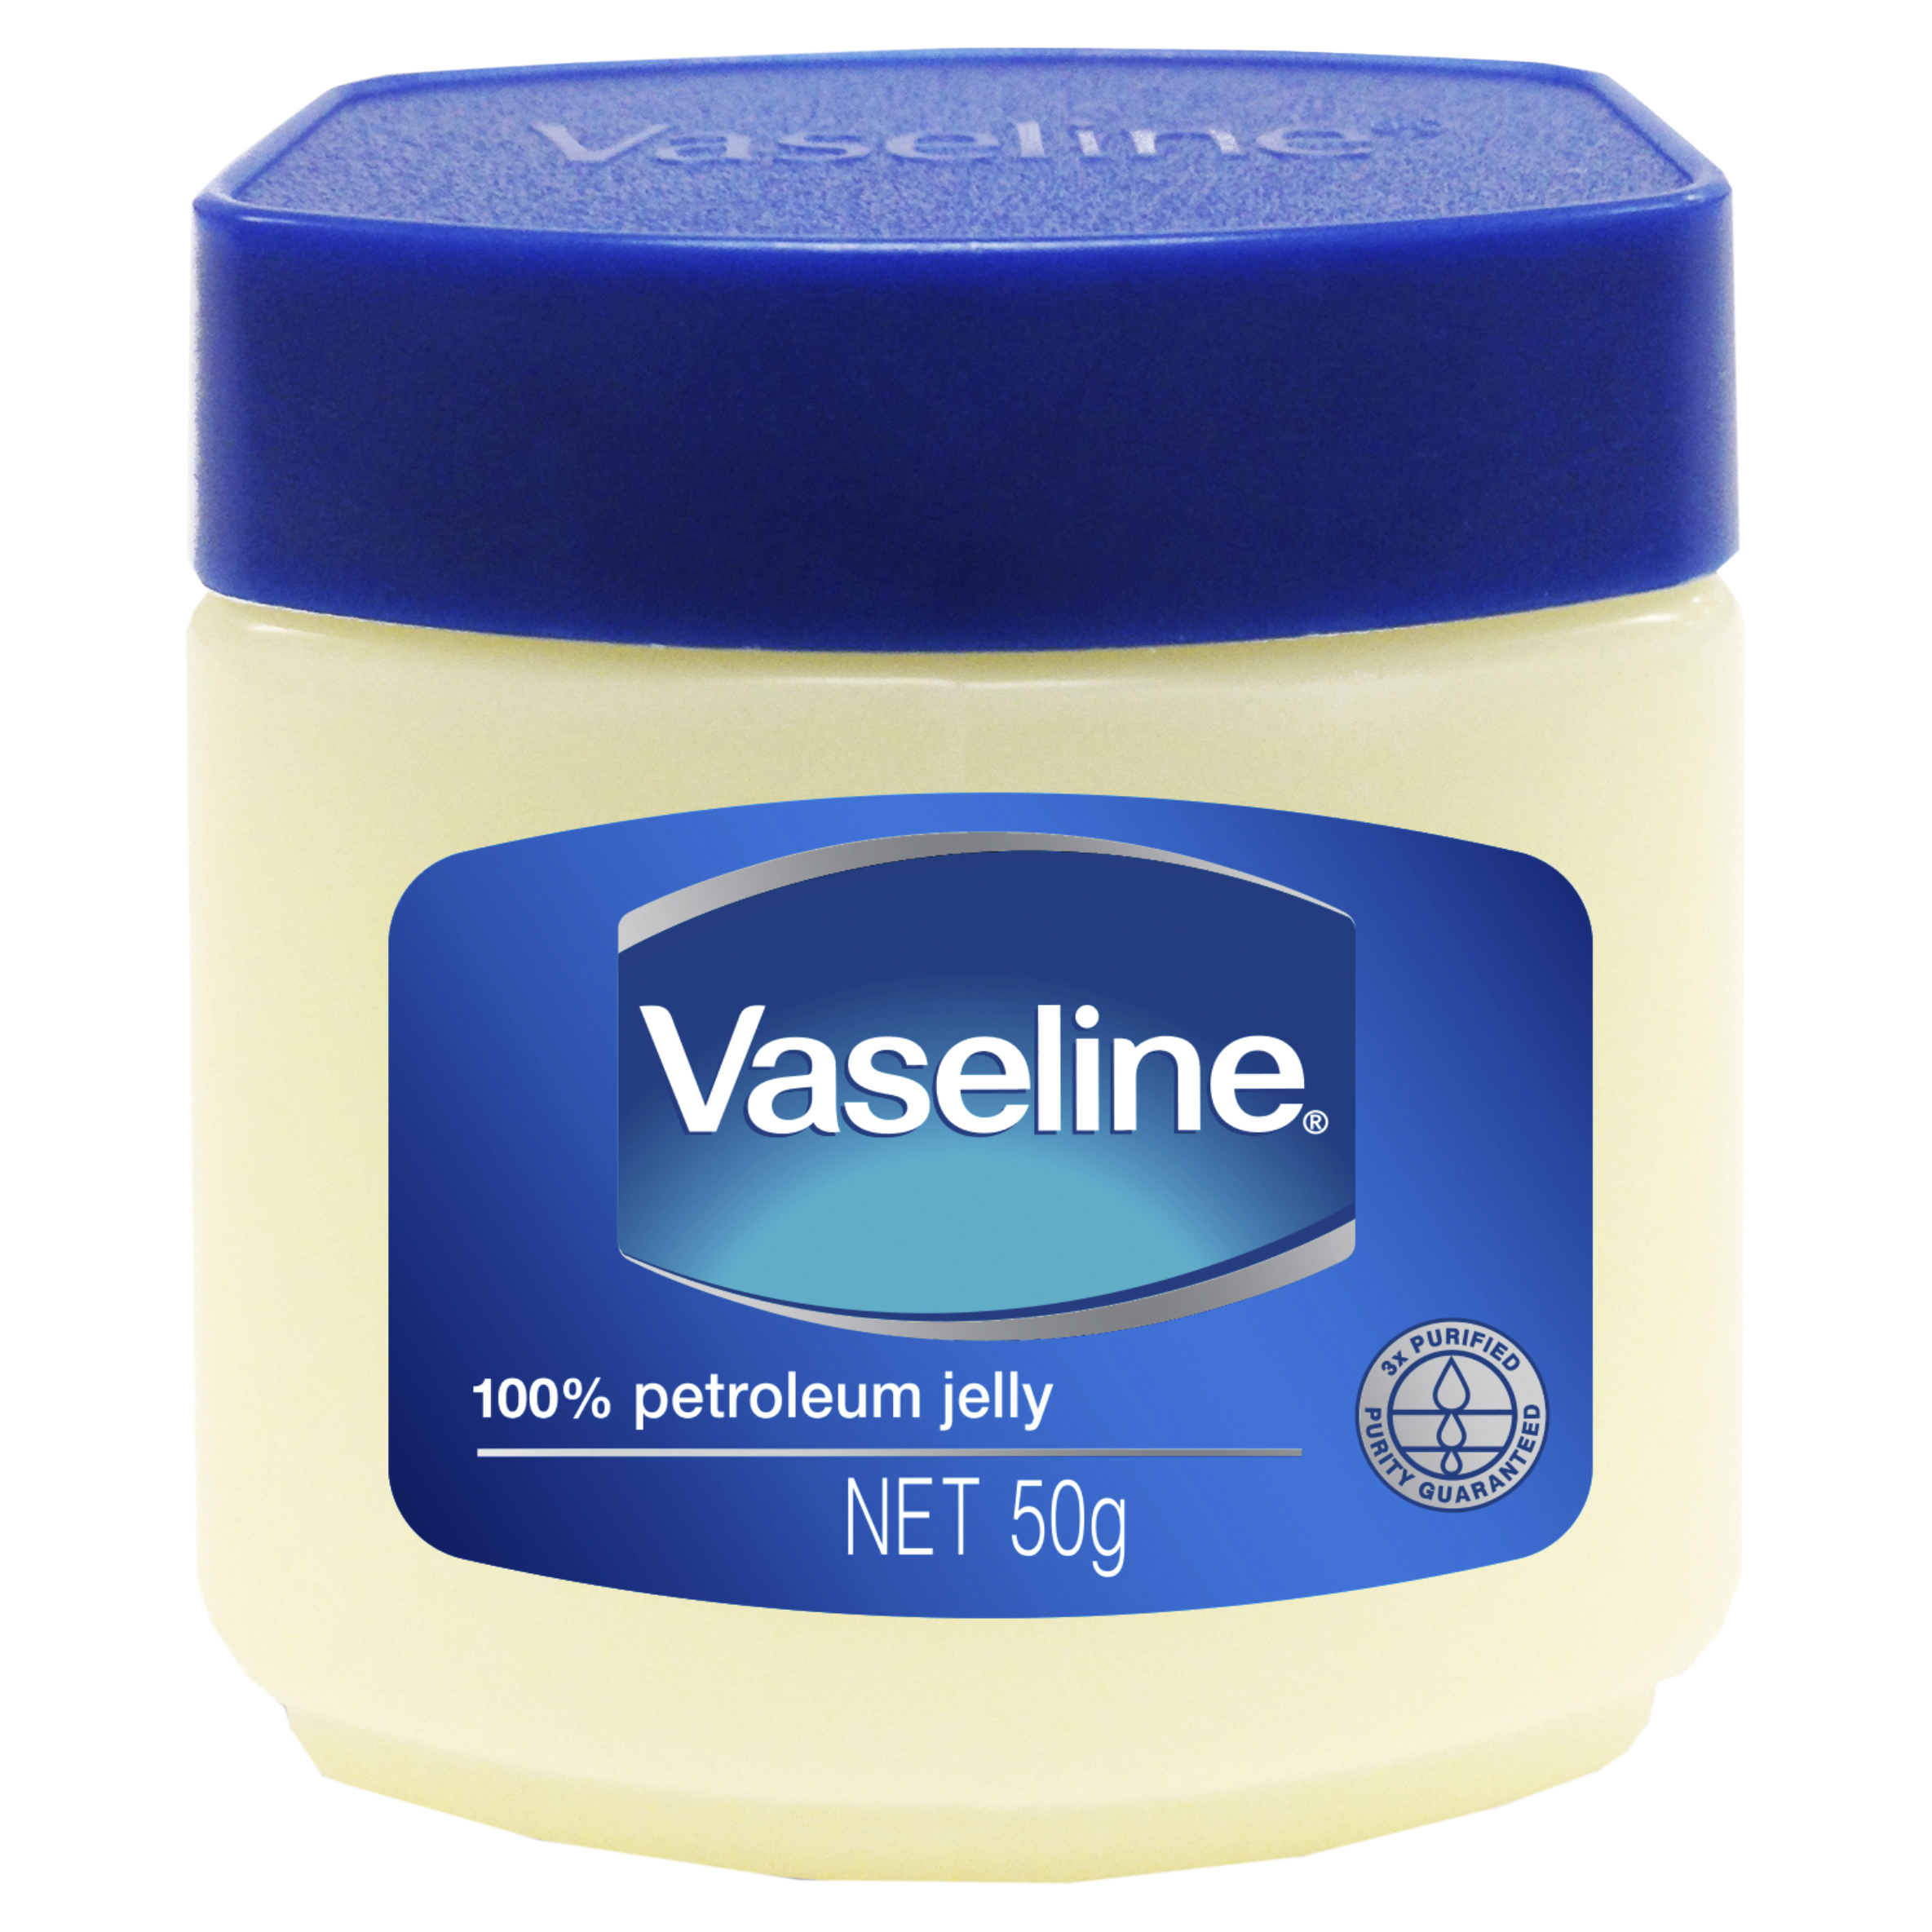 Vaseline Petroleum Jelly 50gm product available at family pharmacy online buy now at qatar doha